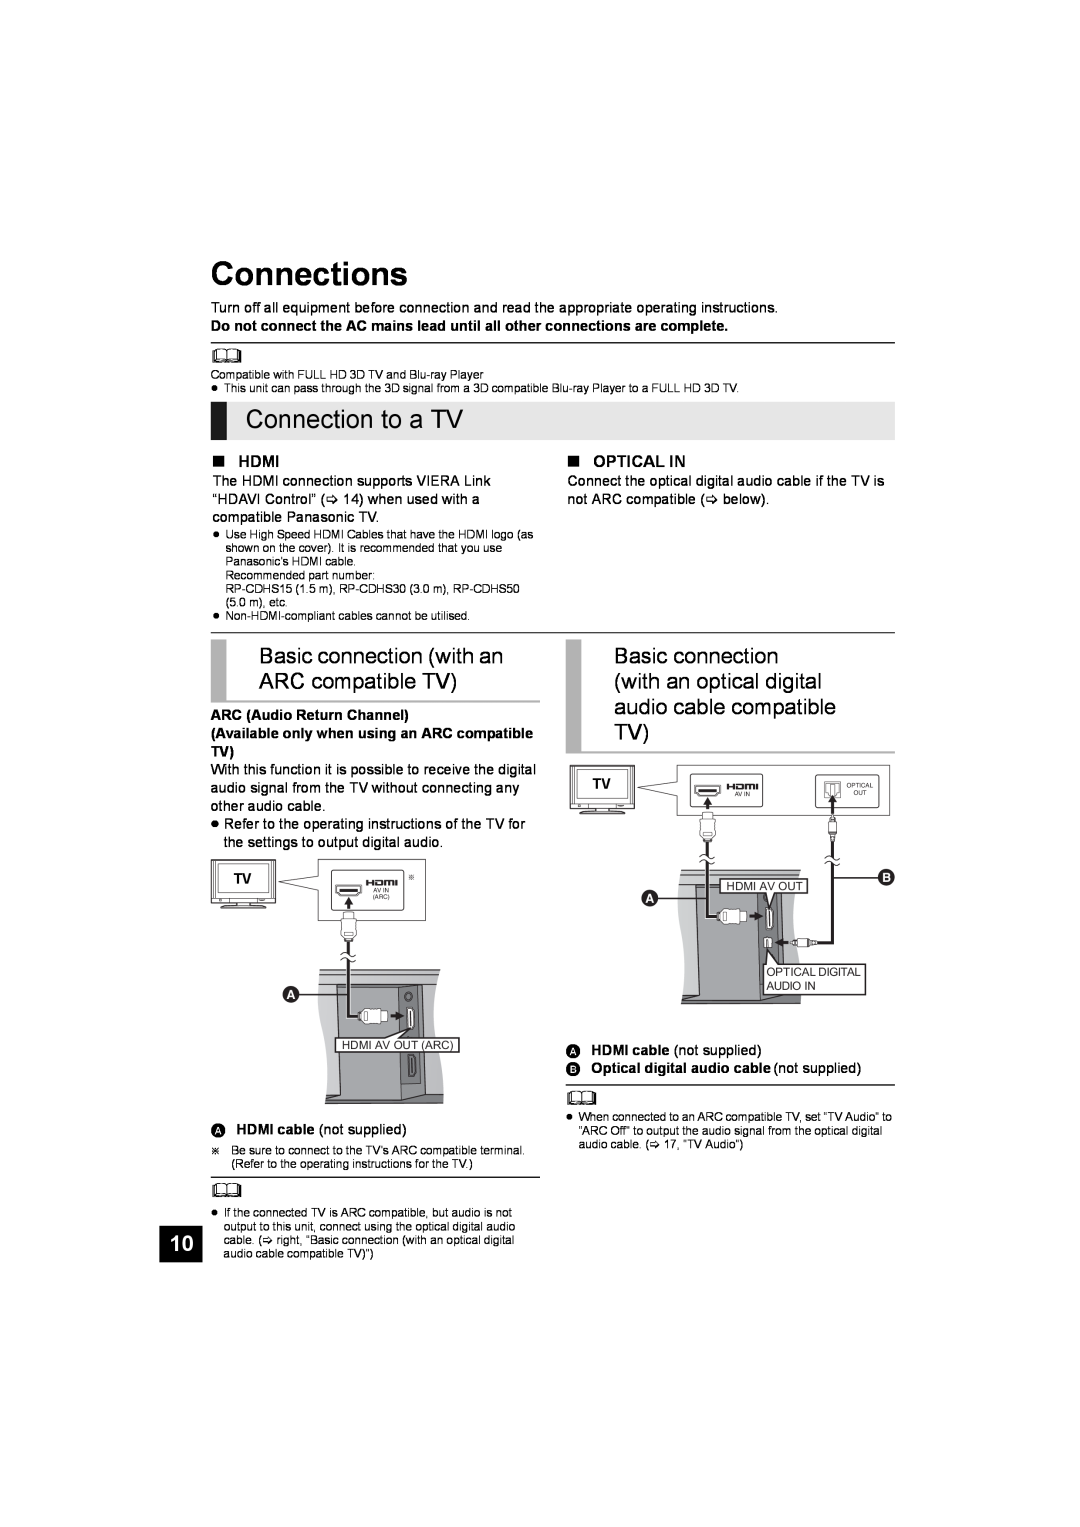 Panasonic SC-HTB10 Connections, Connection to a TV, Basic connection with an ARC compatible TV, Hdmi, ∫Optical In 